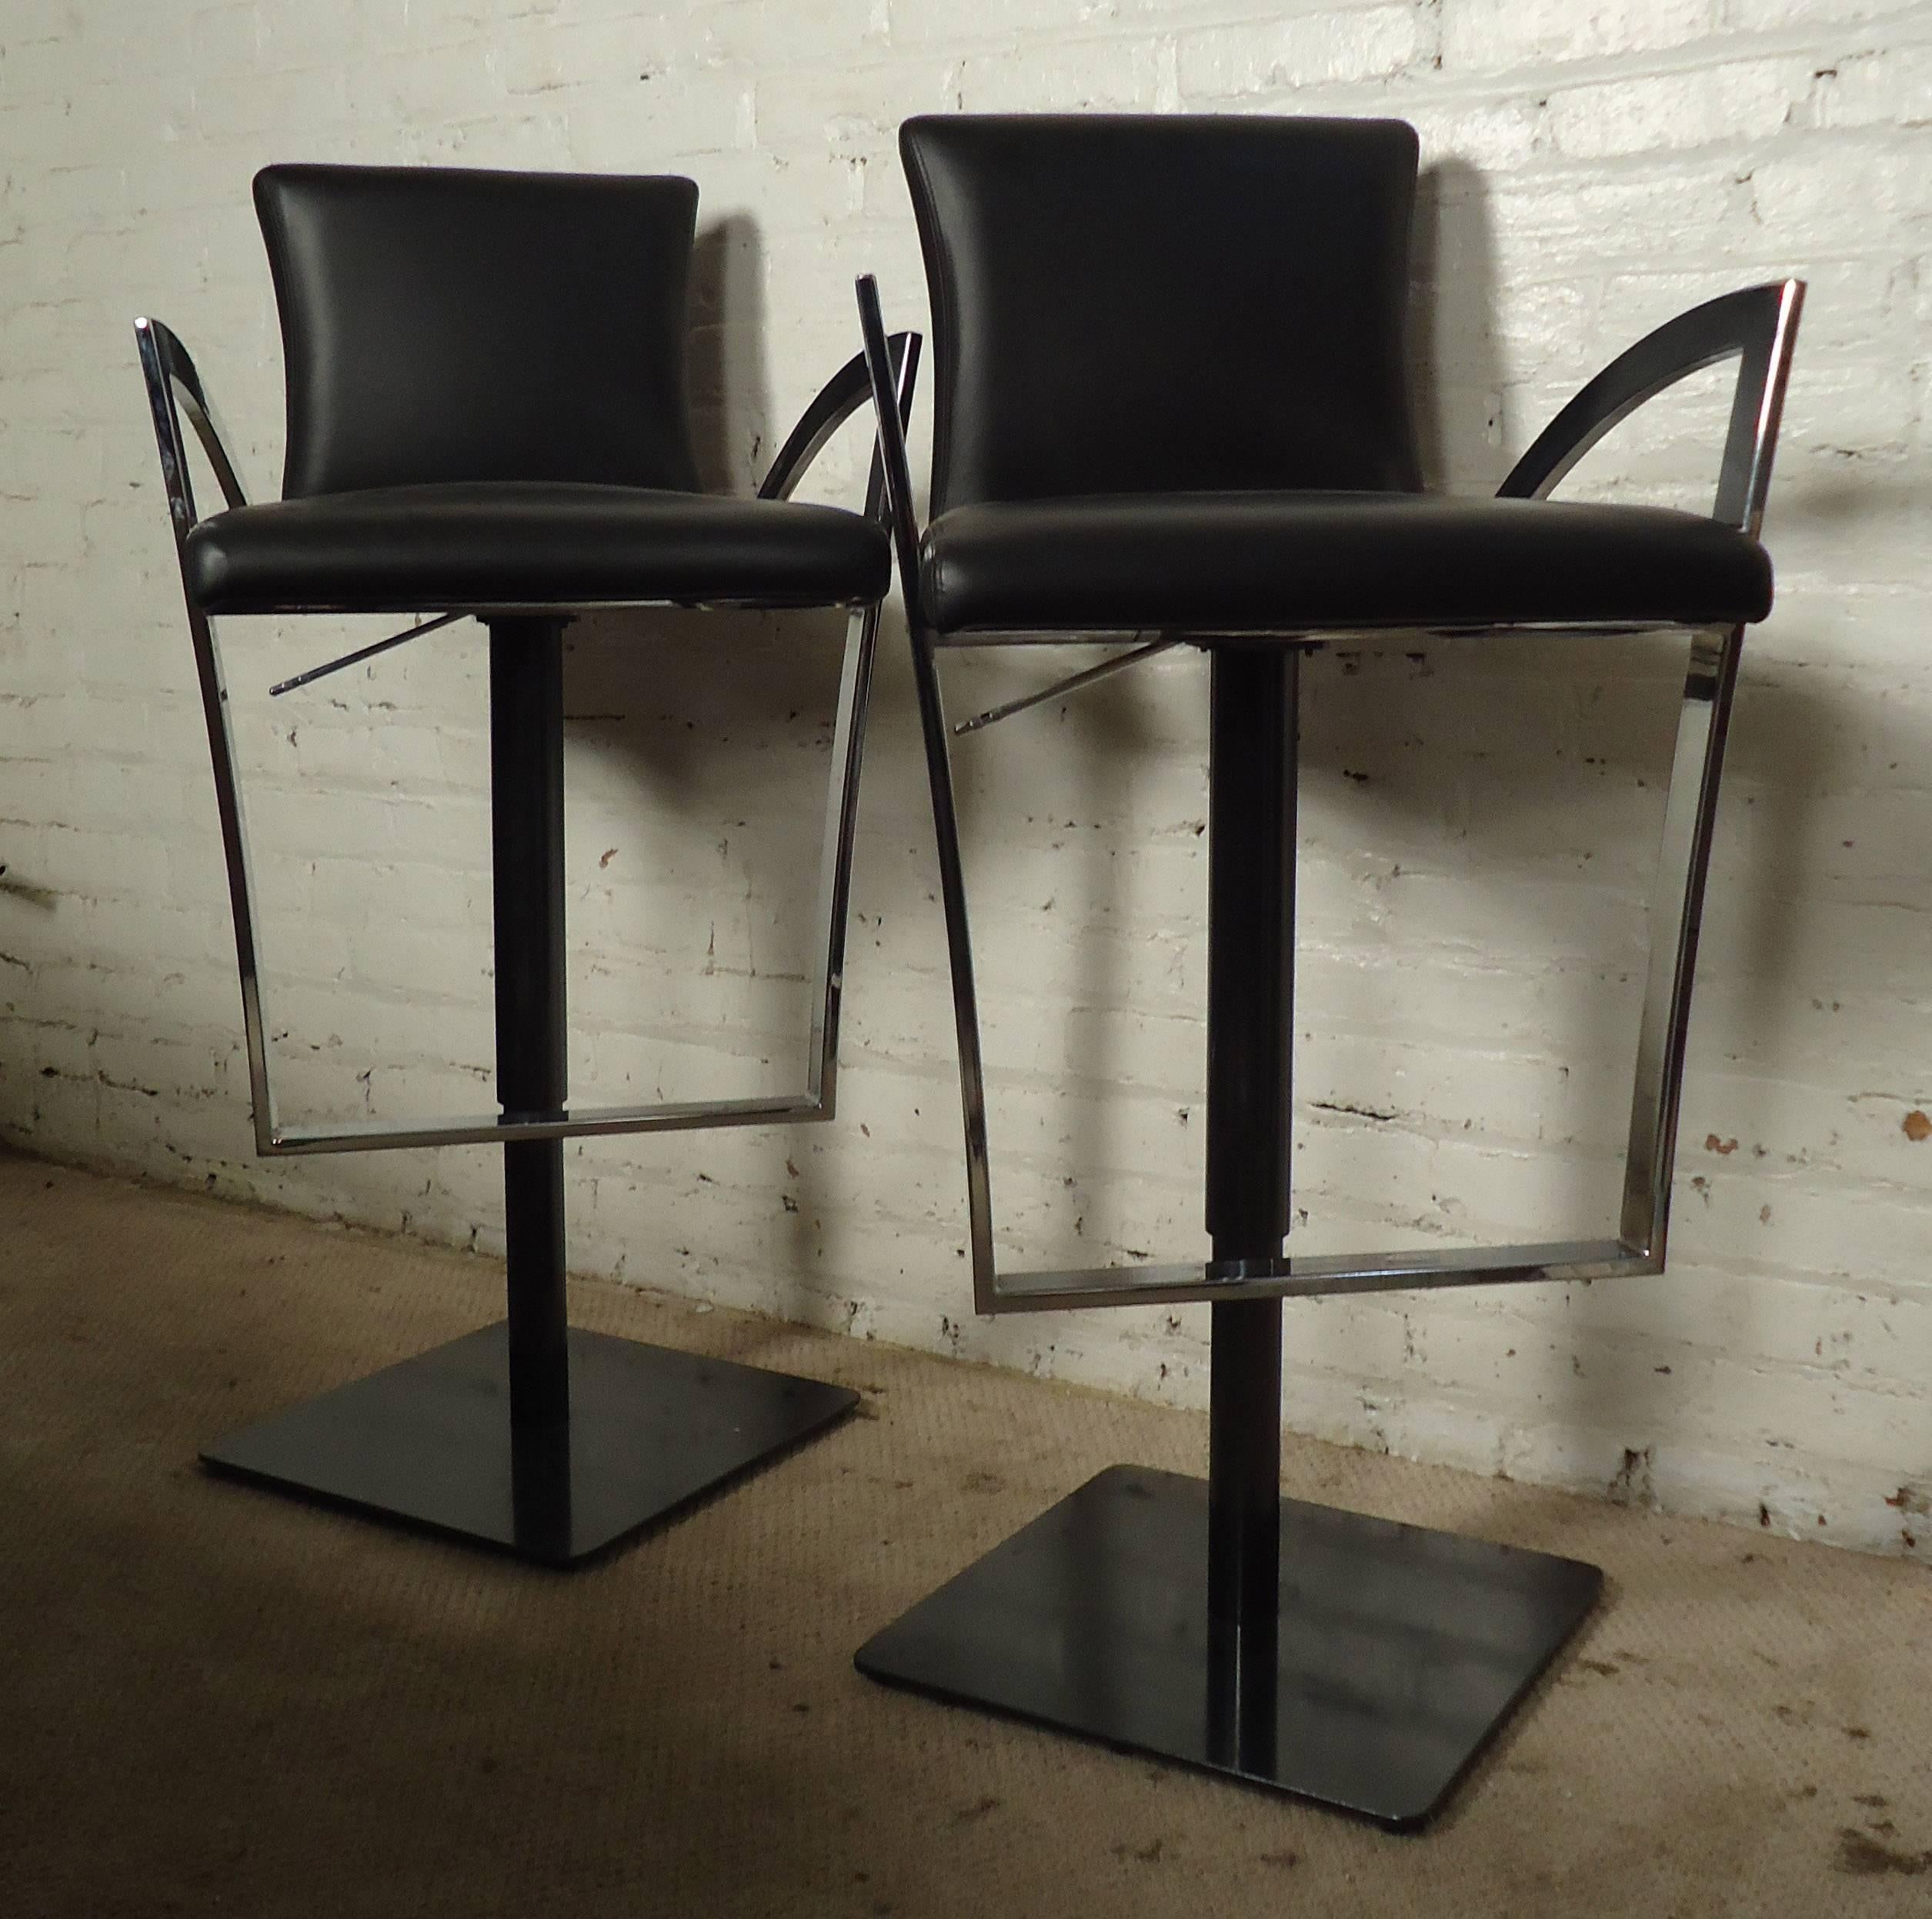 Two stools featuring leather upholstery, sculpted chrome arms, and sturdy metal base with adjustable height 25 - 30 inches; four stools are available, price is for one pair.

Please confirm item location NY or NJ with dealer.